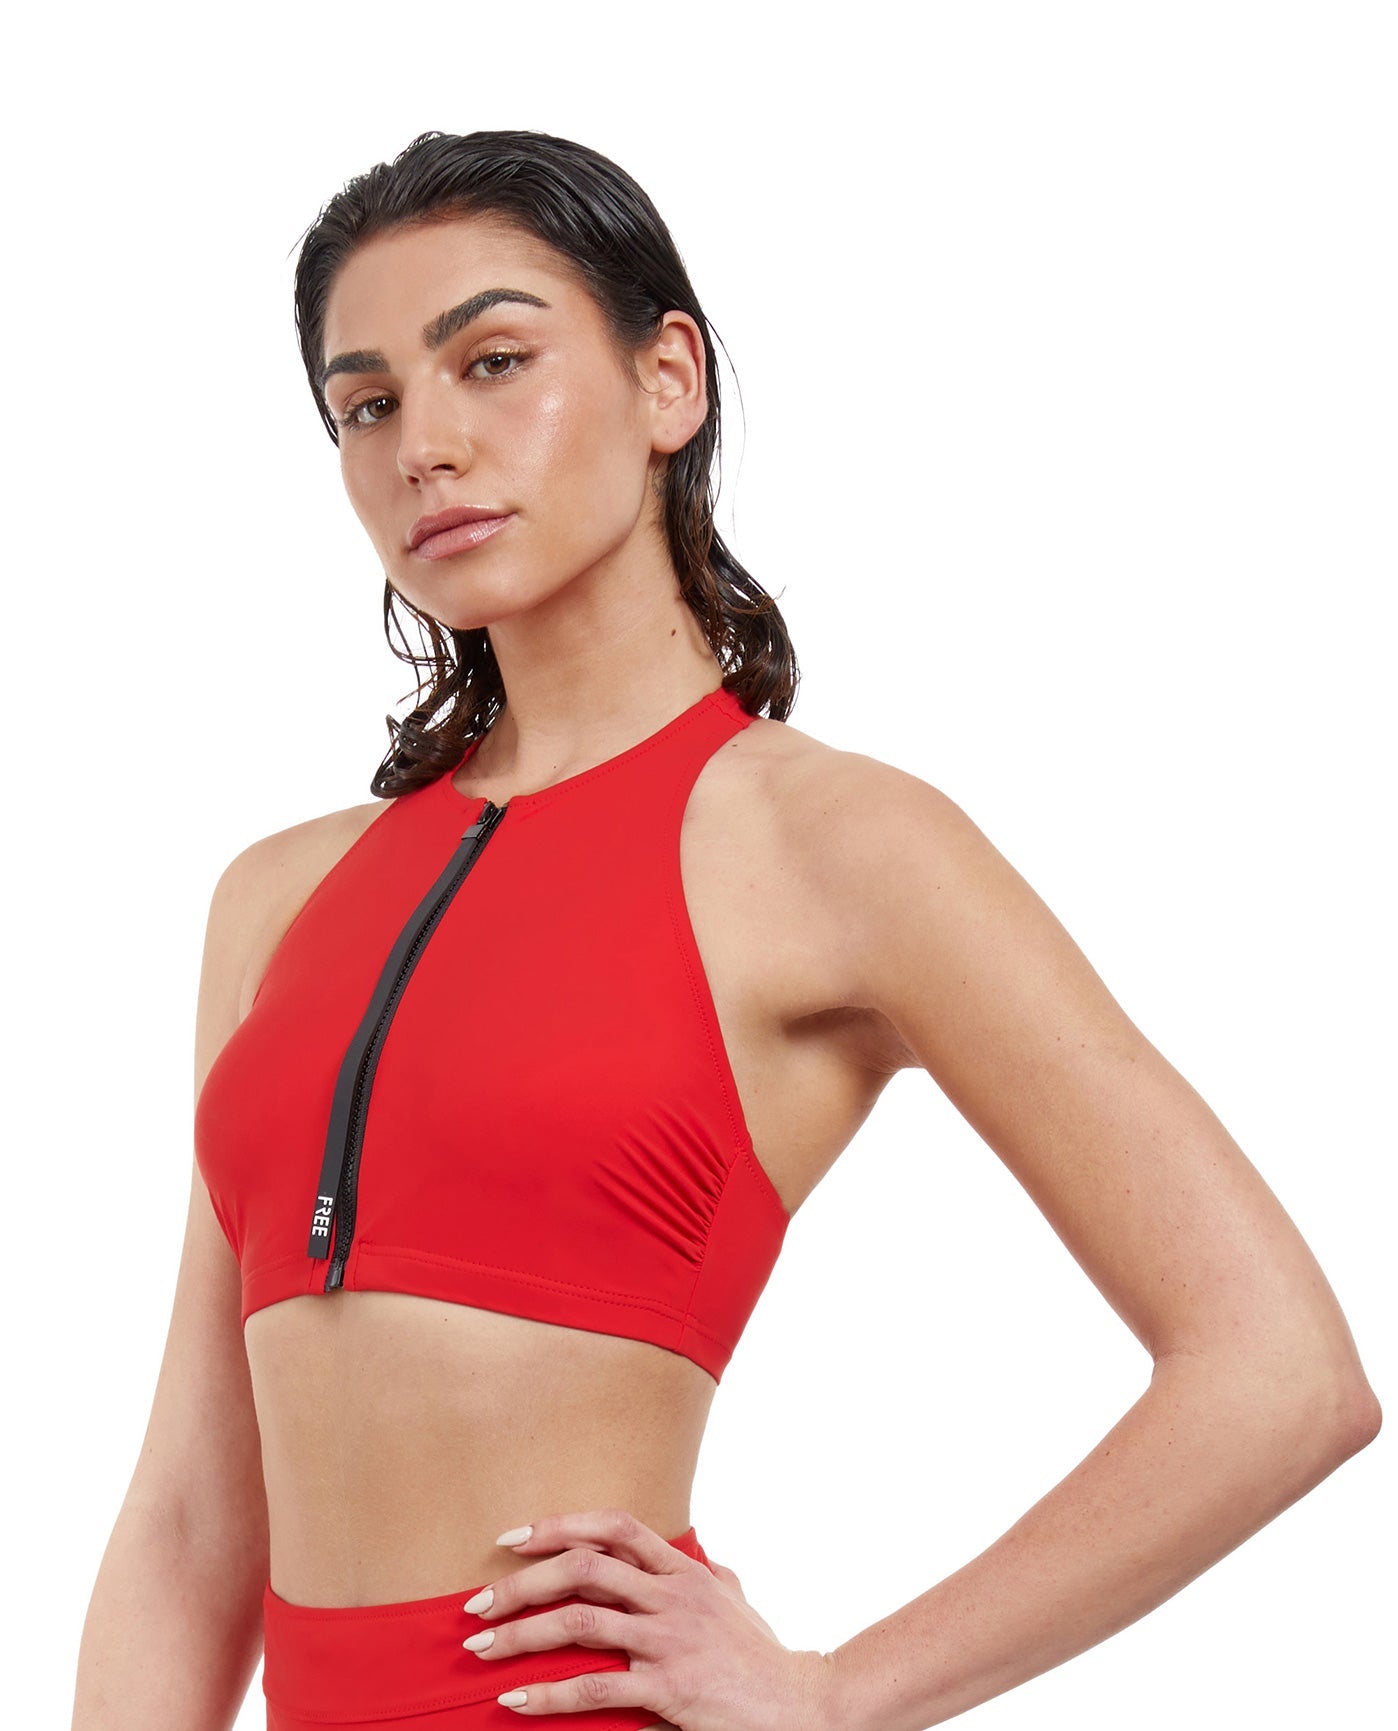 FREE SPORT ULTIMATE WAVE RED